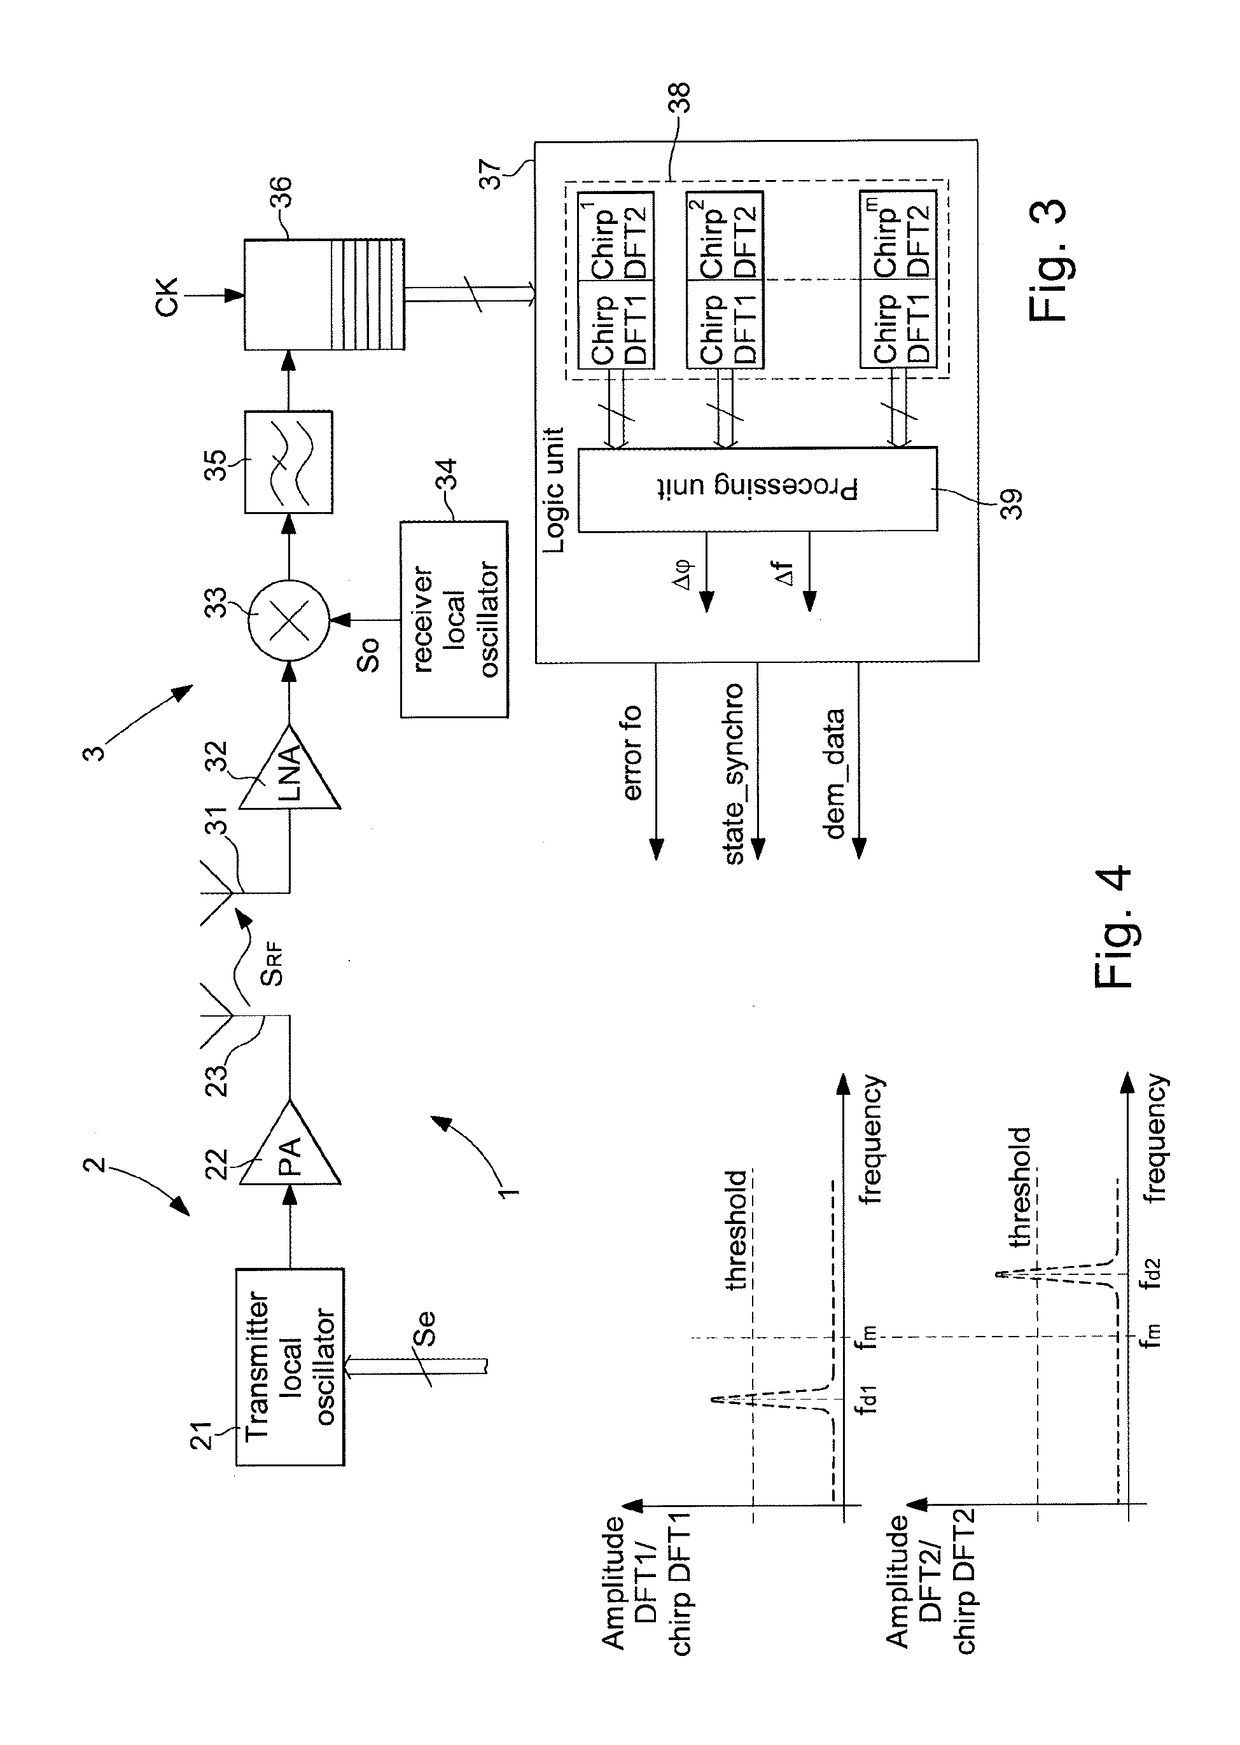 Communication process and system for high-sensitivity and synchronous demodulation signals